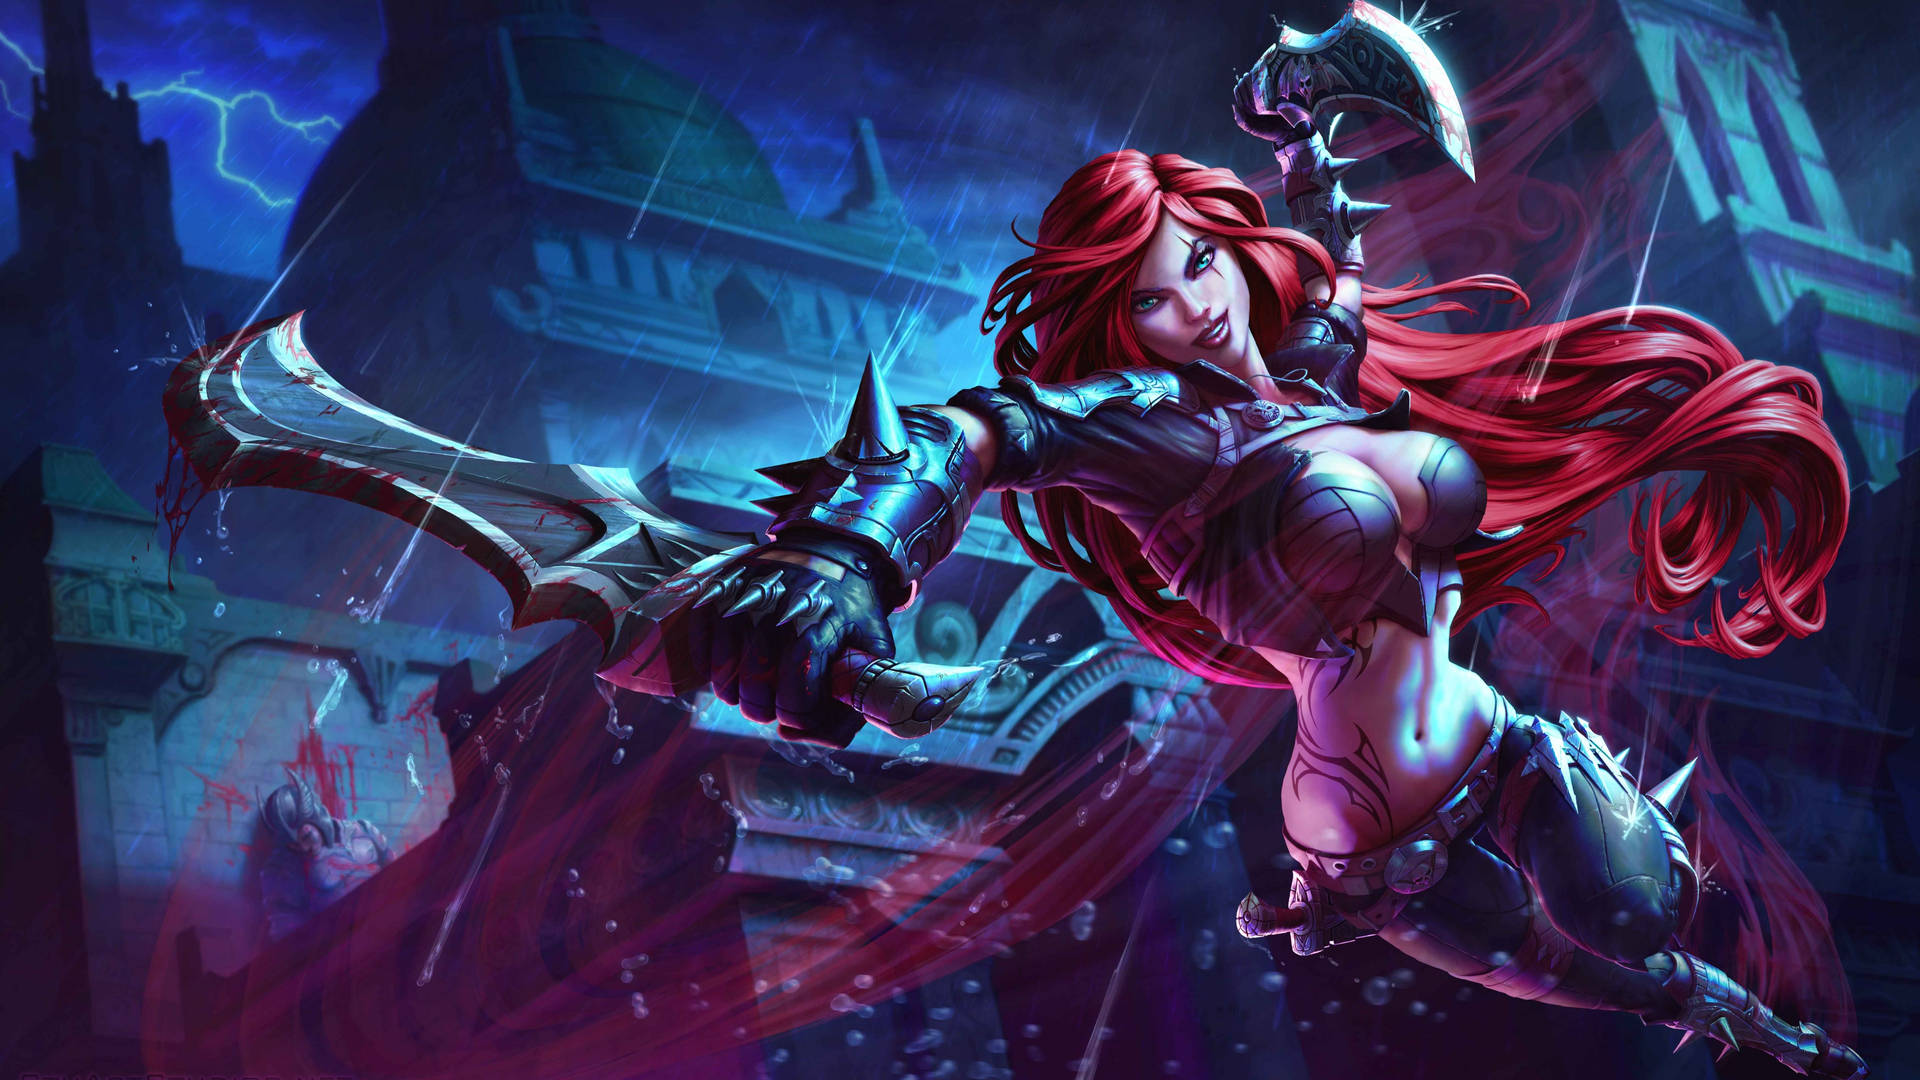 3D champions of the League of Legends Wallpaper